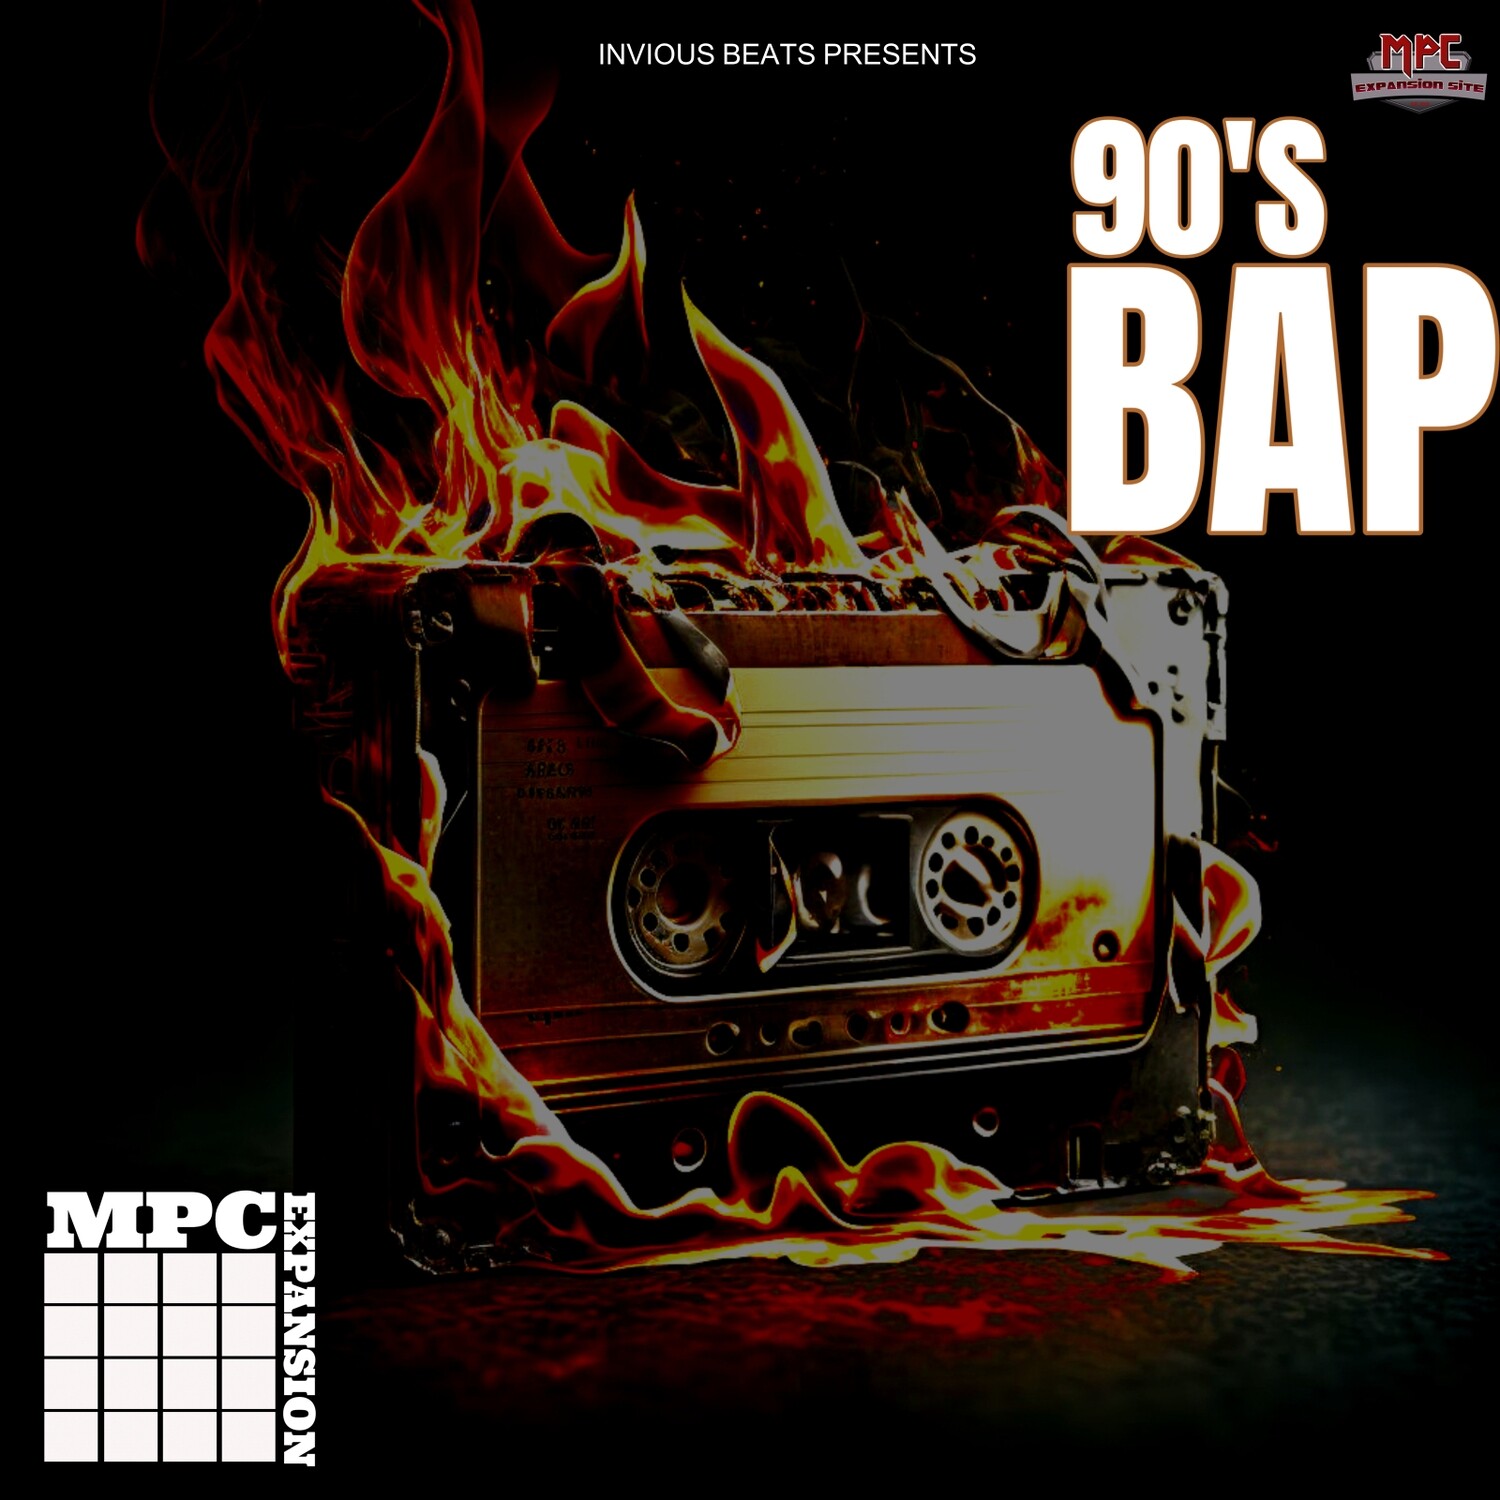 MPC EXPANSION '90'S BAP' by INVIOUS